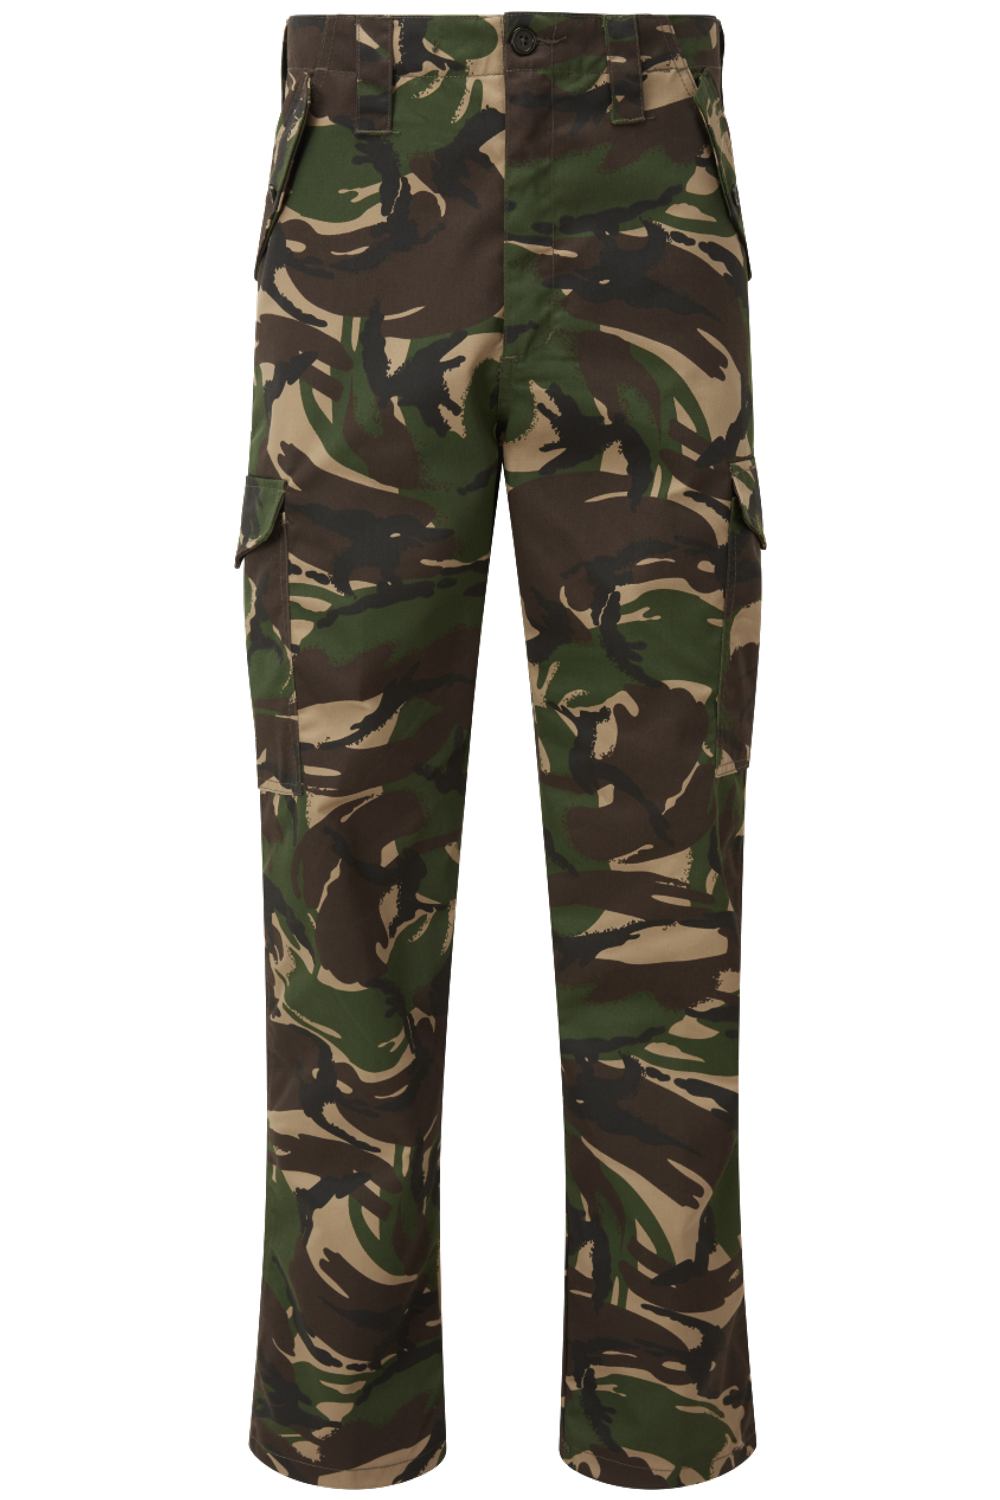 Fort Combat Trousers Woodland